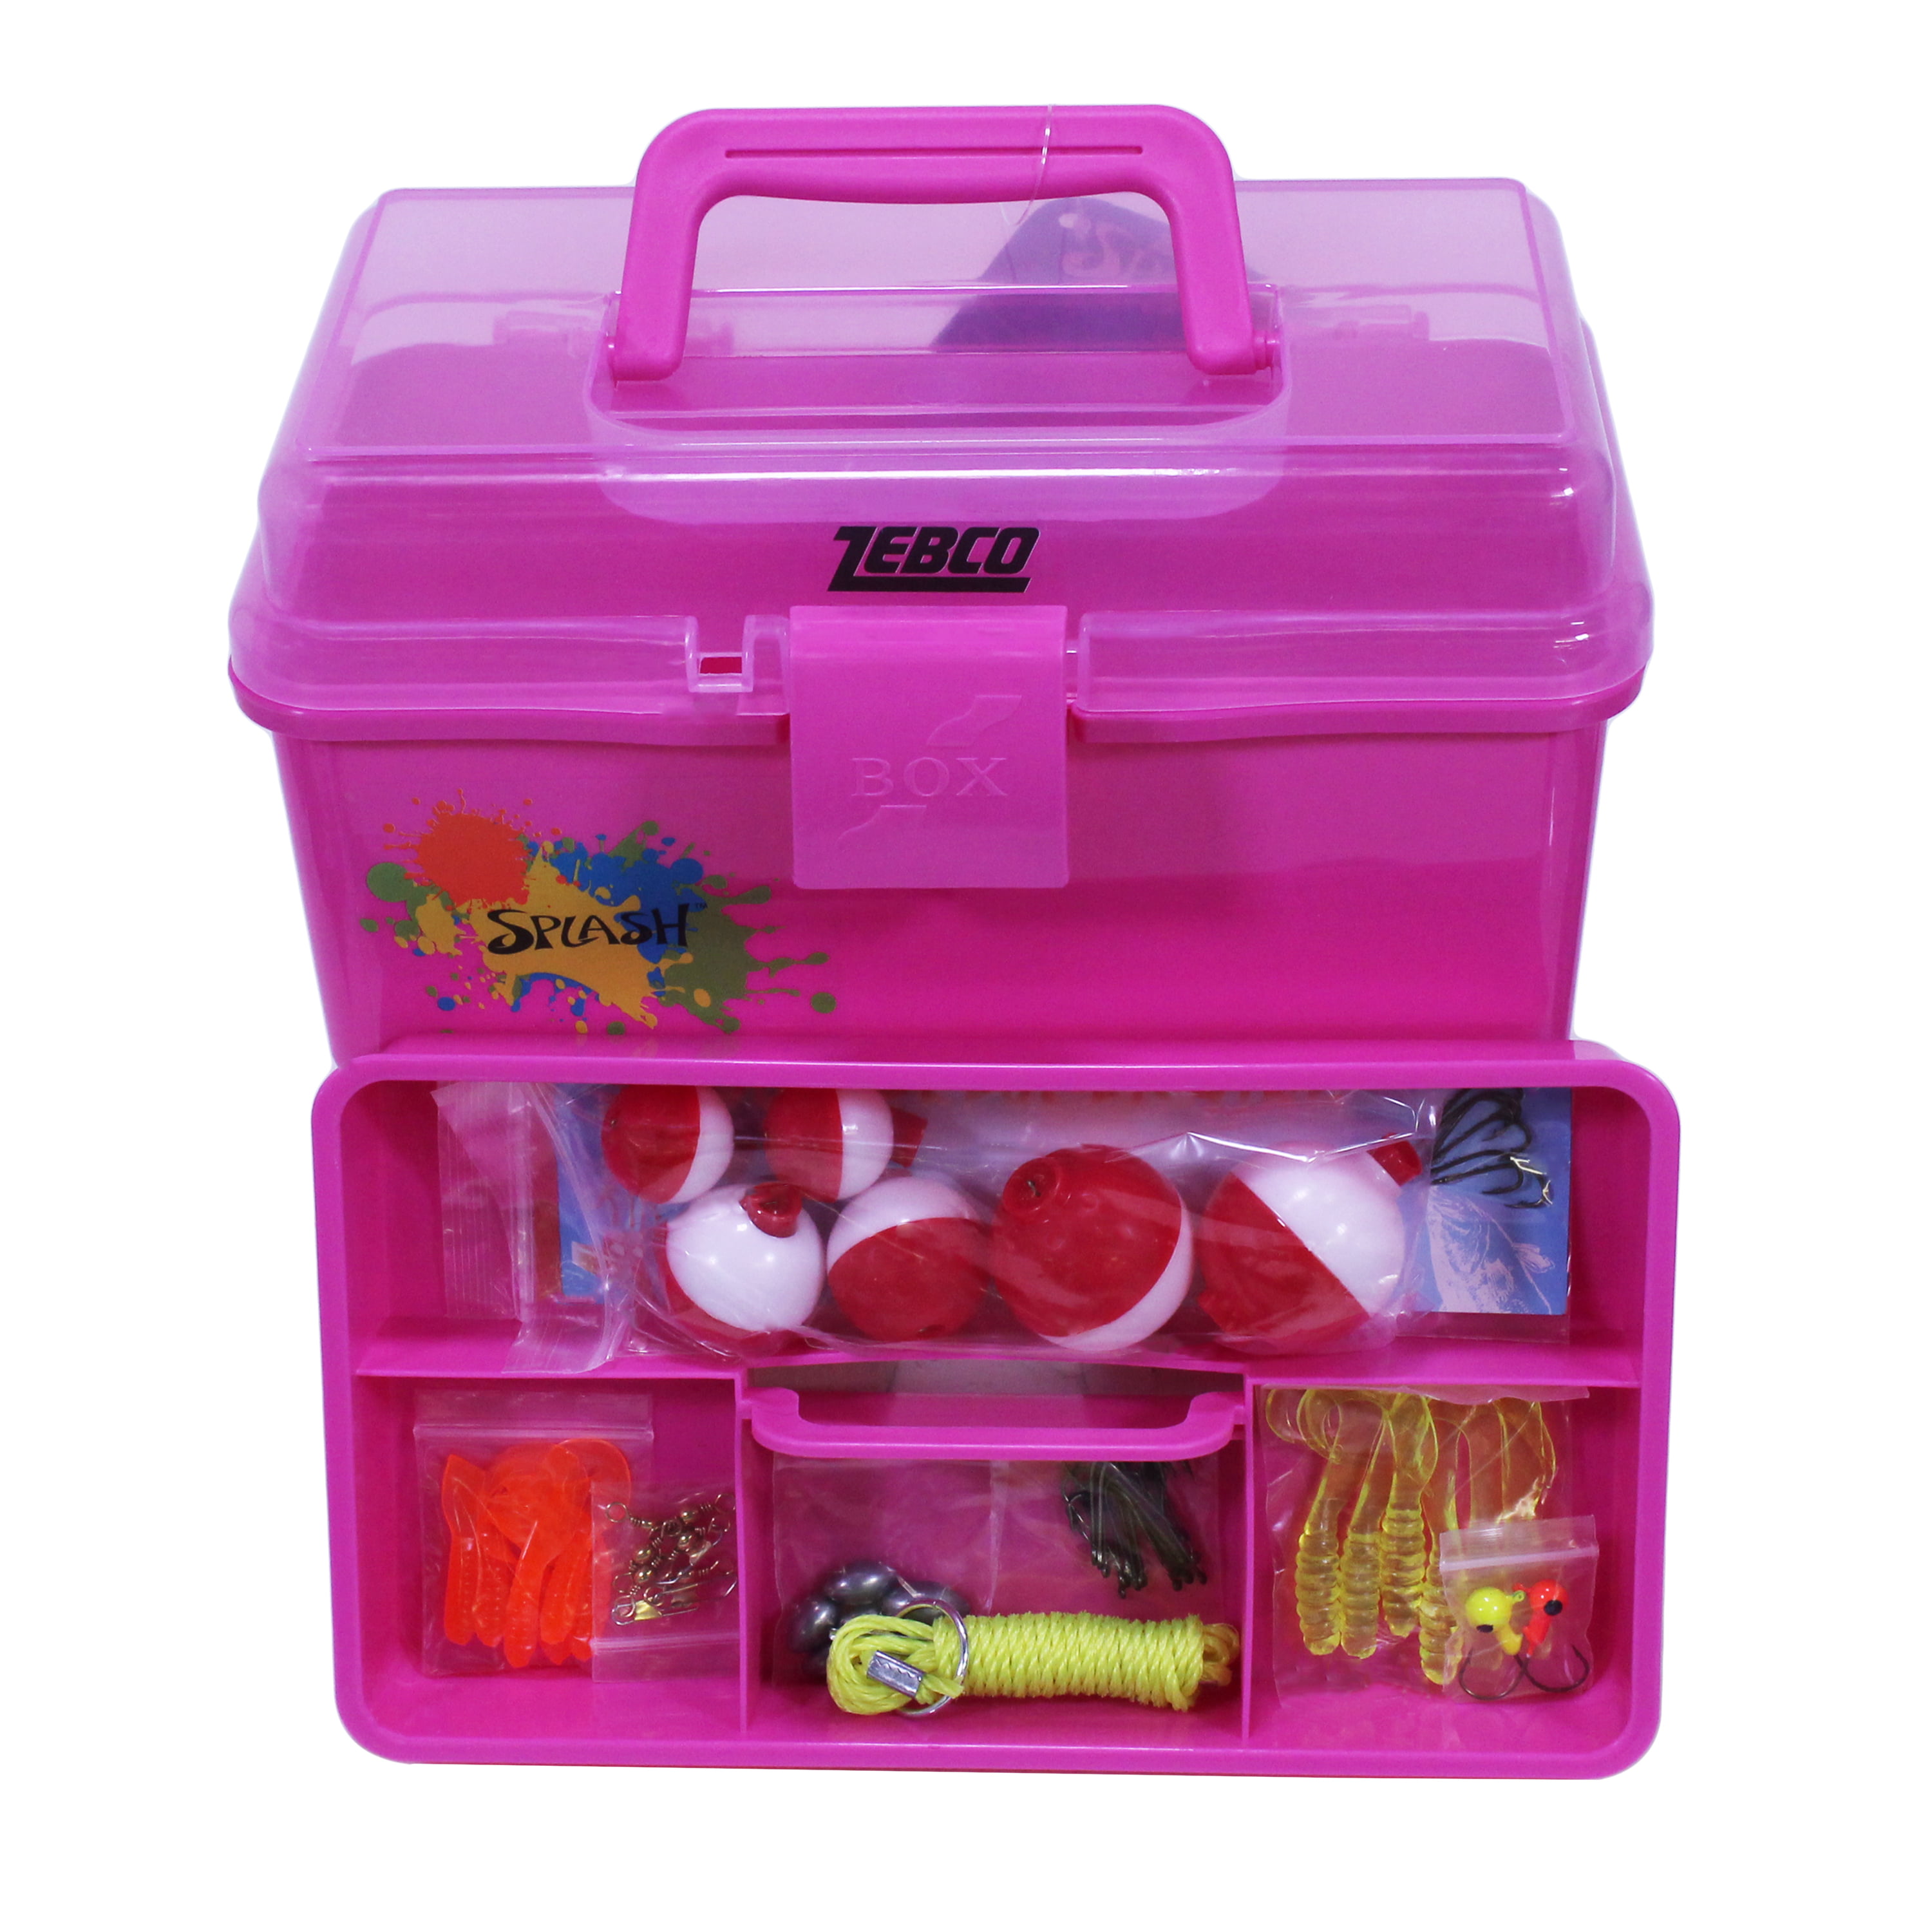 Zebco Splash Youth Fishing Tackle Box Kit with 57 Pieces, Pink